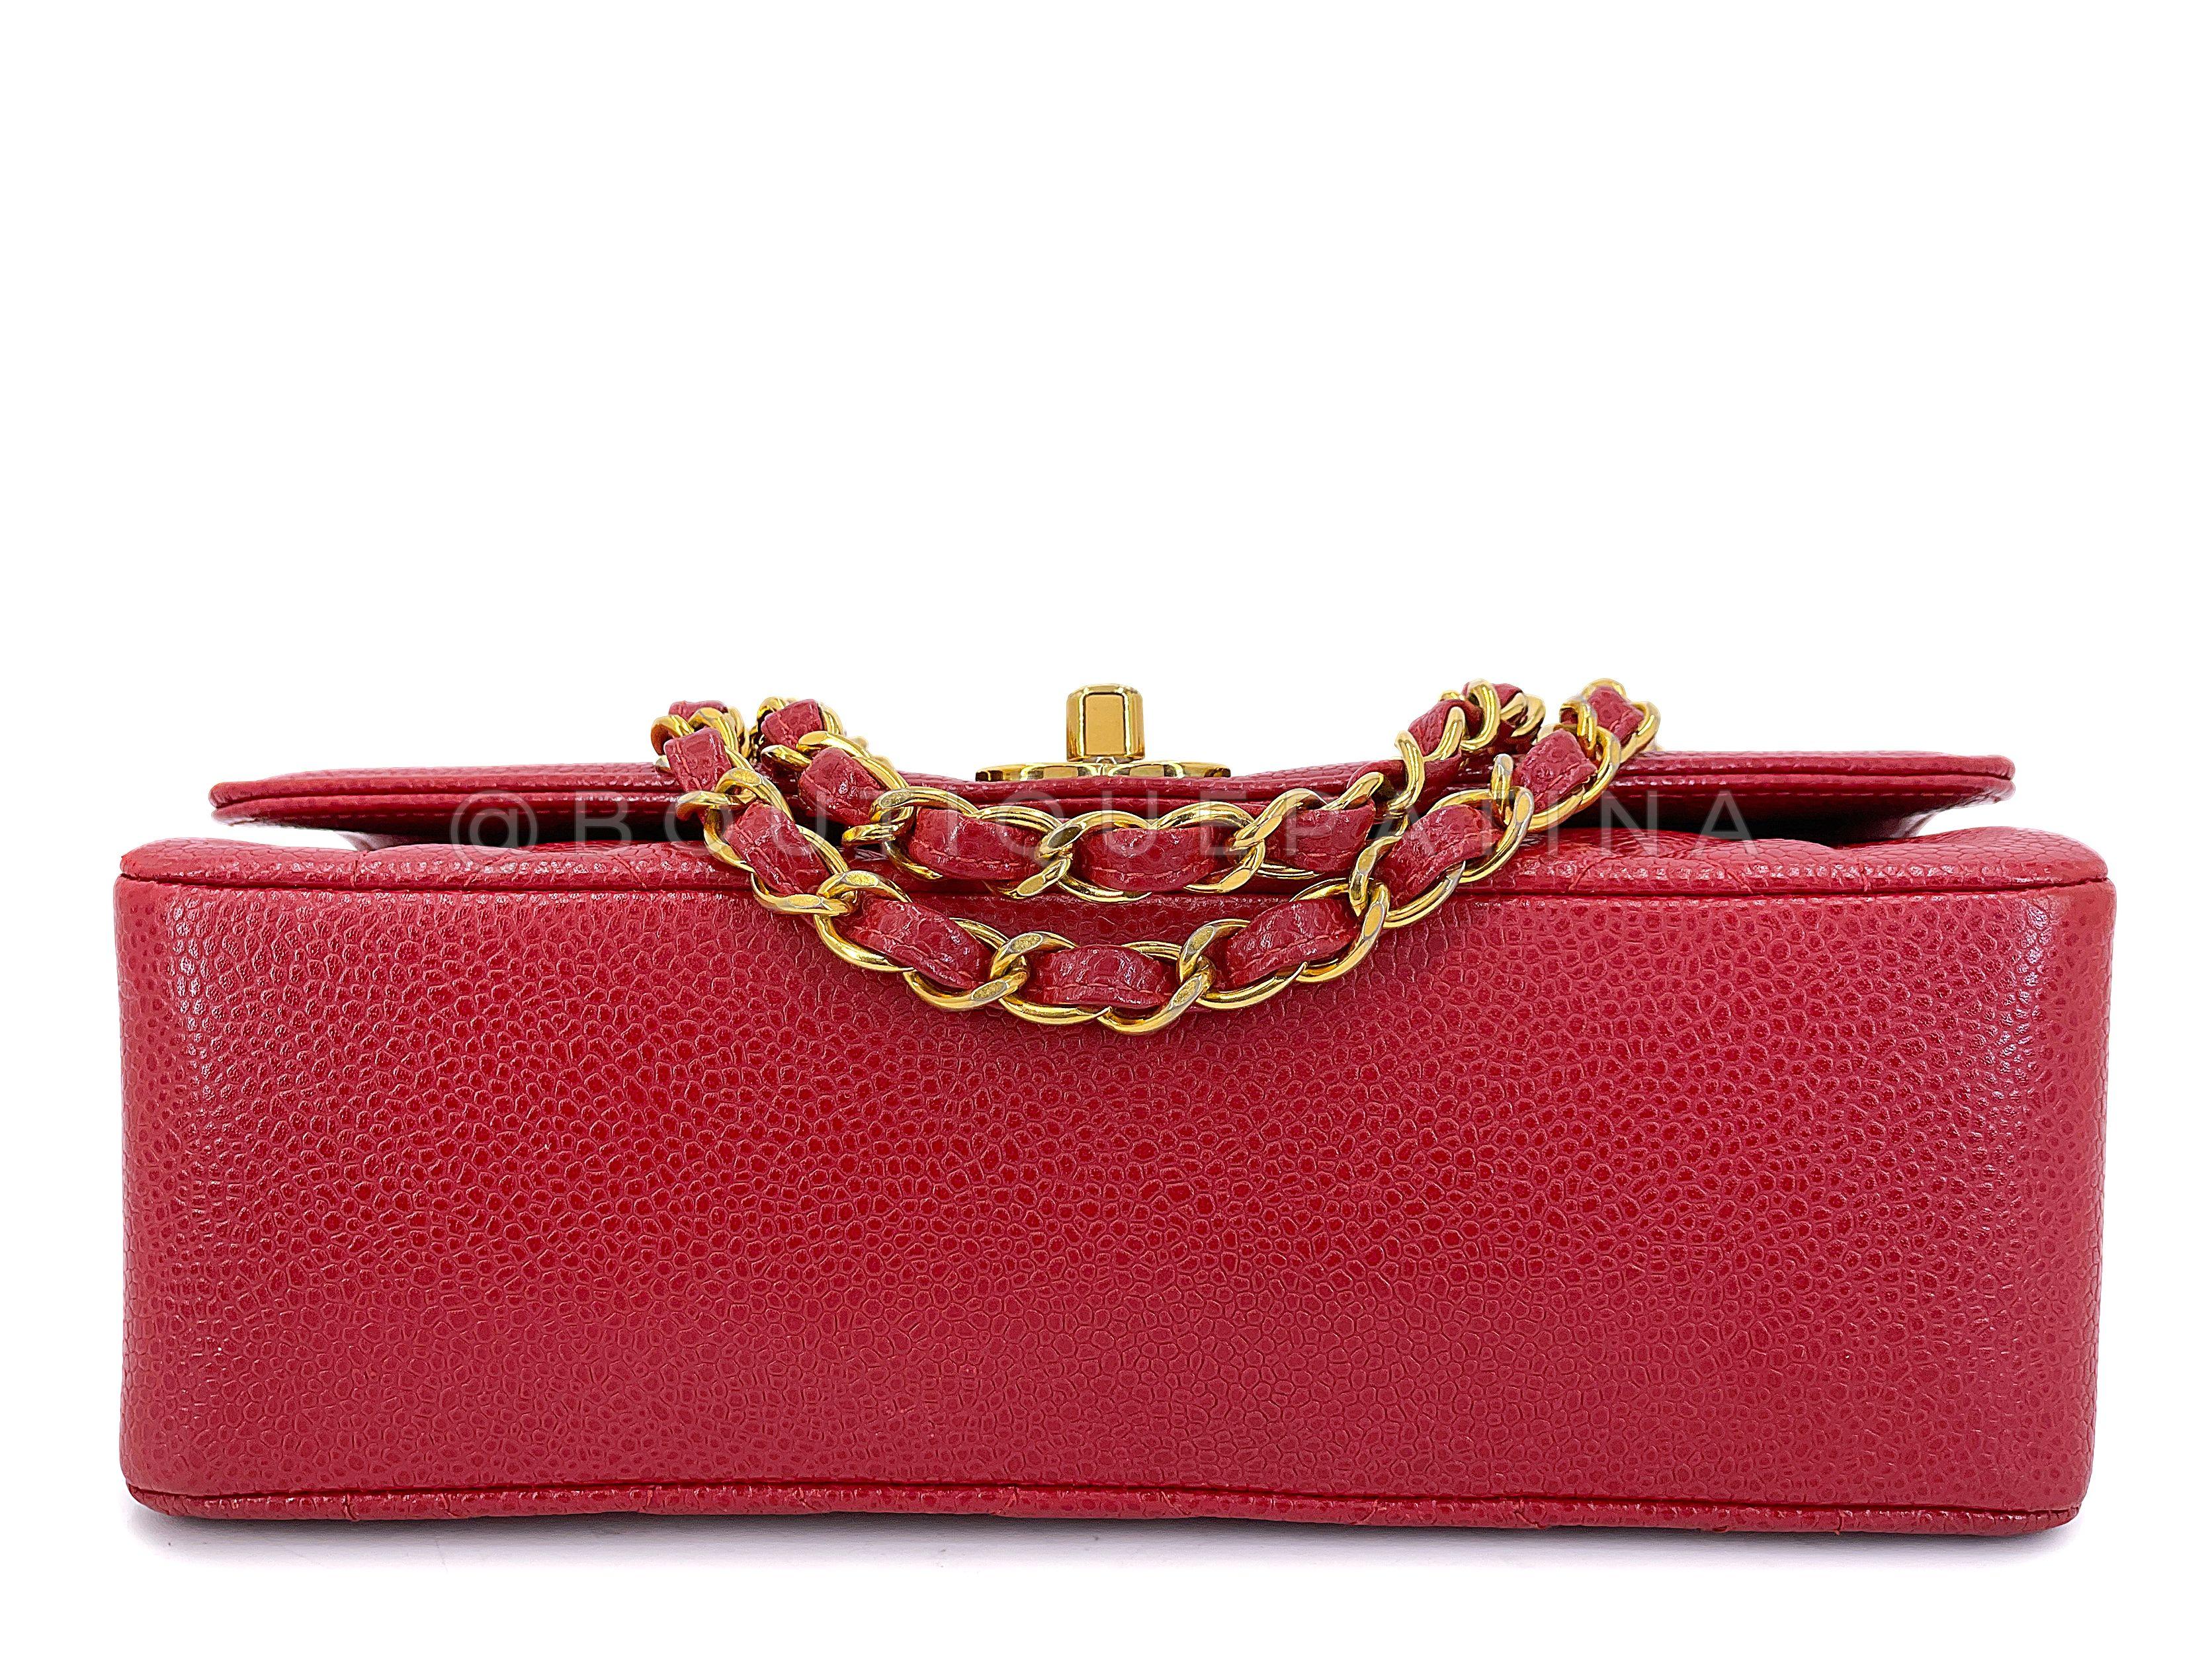 Chanel Vintage Red Caviar Small Diana Flap Bag 24k GHW 67655 For Sale 2